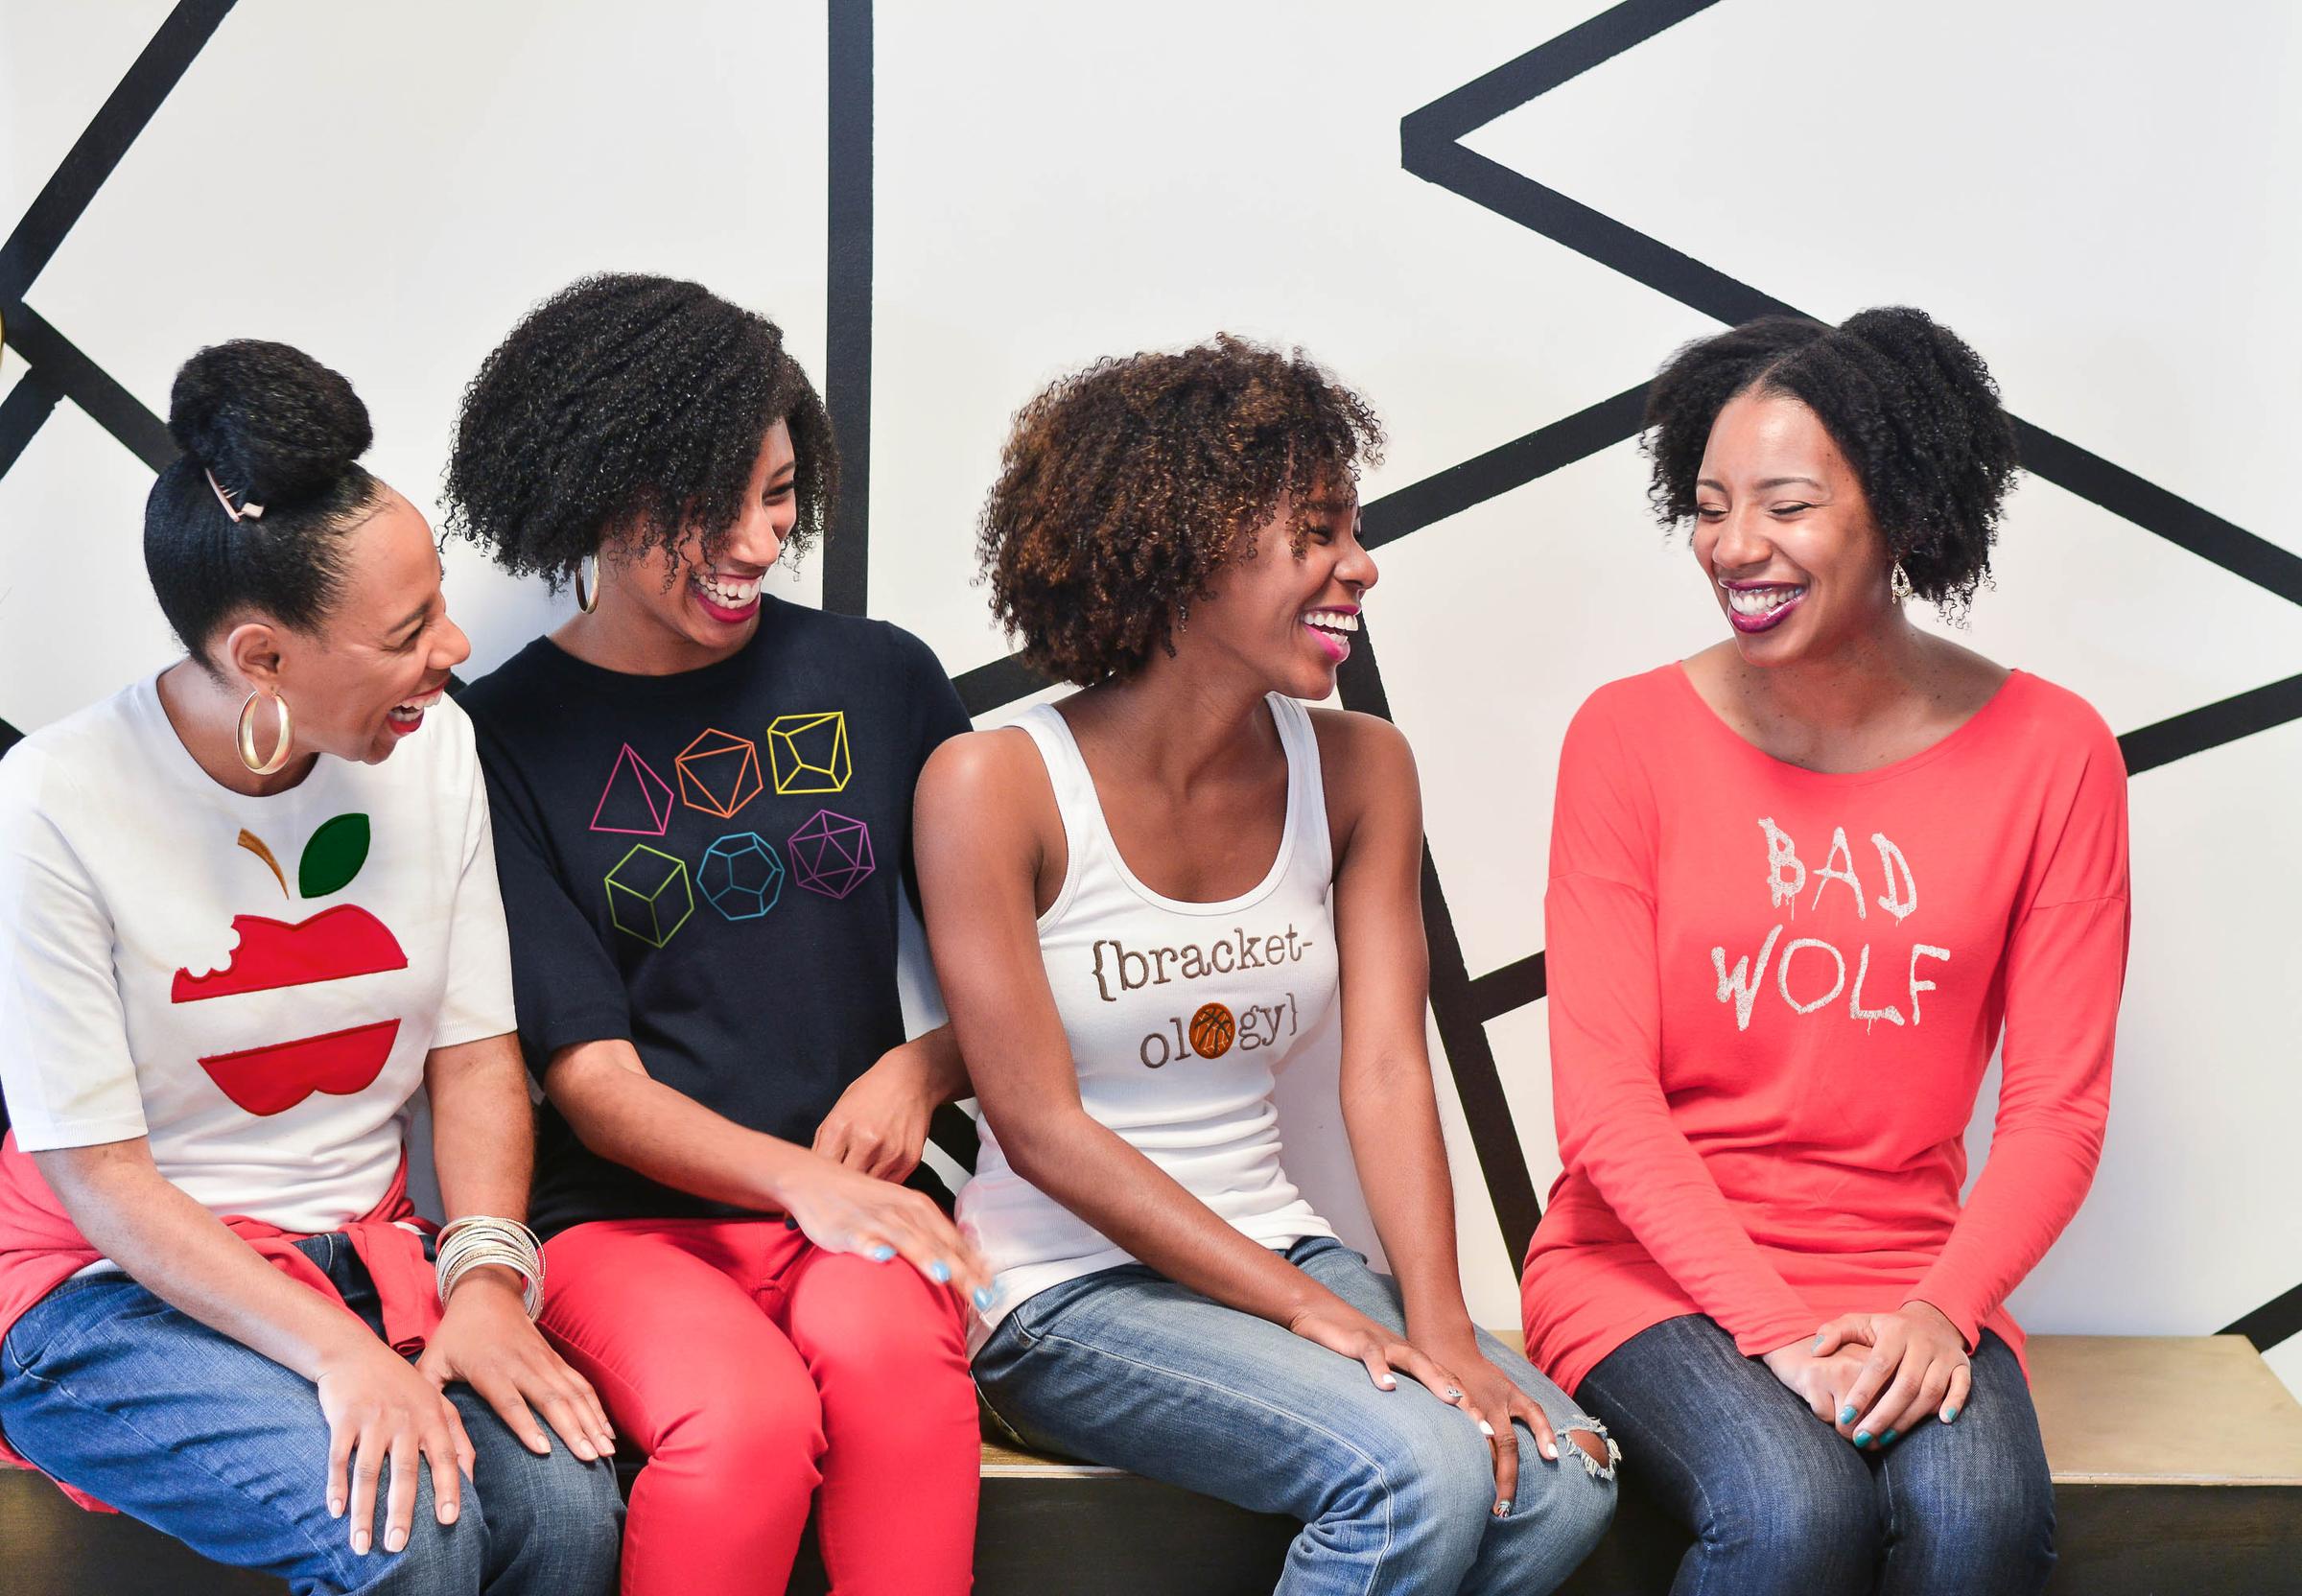 Four black women are sitting on a bench in front of a white wall with geometric black artwork. The women are smiling and laughing. Each woman has a shirt with an applique or embroidery design on the front.